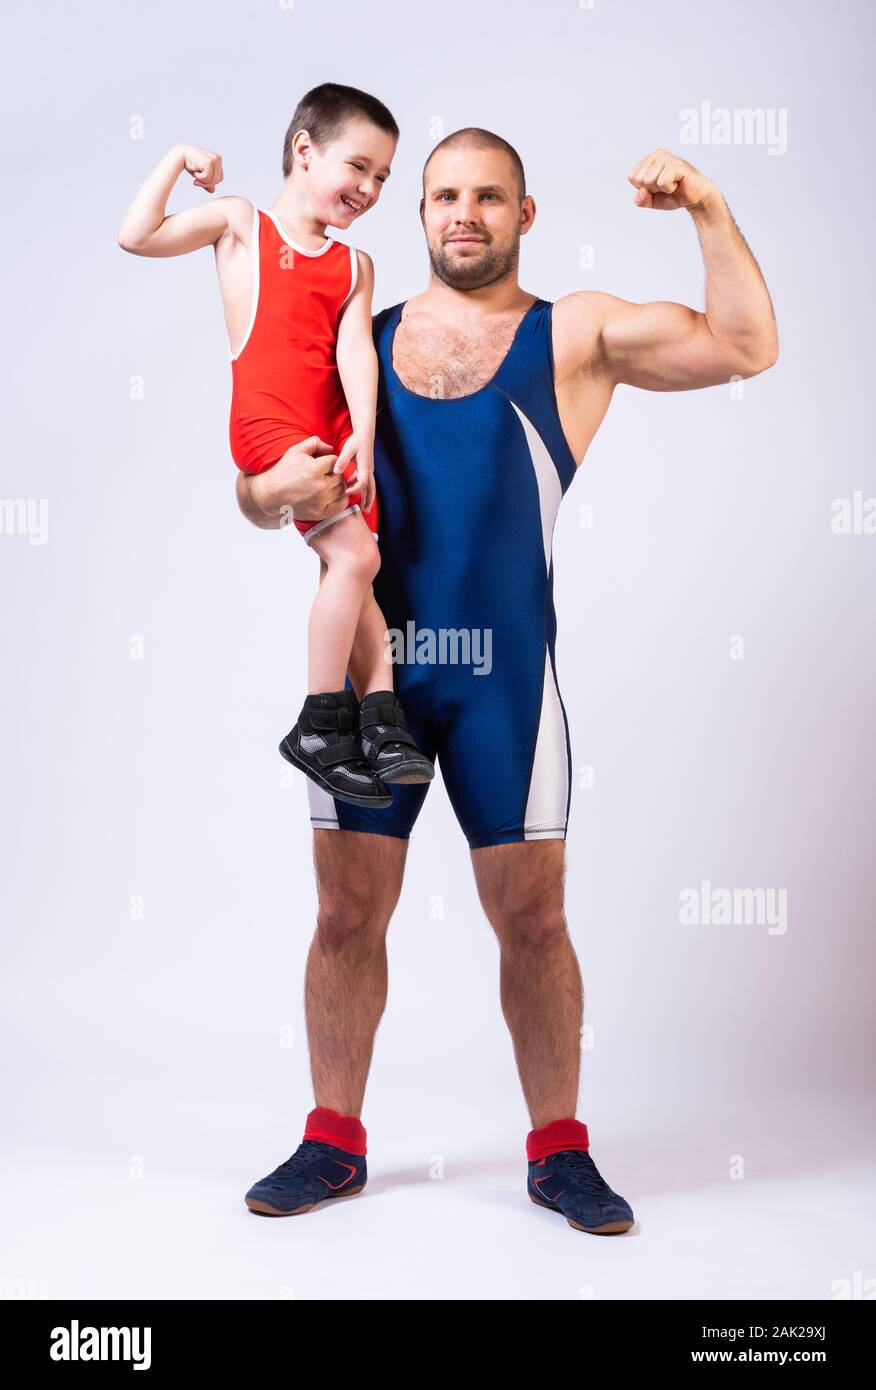 Men in wrestling tights holds the boy with one hand and they both